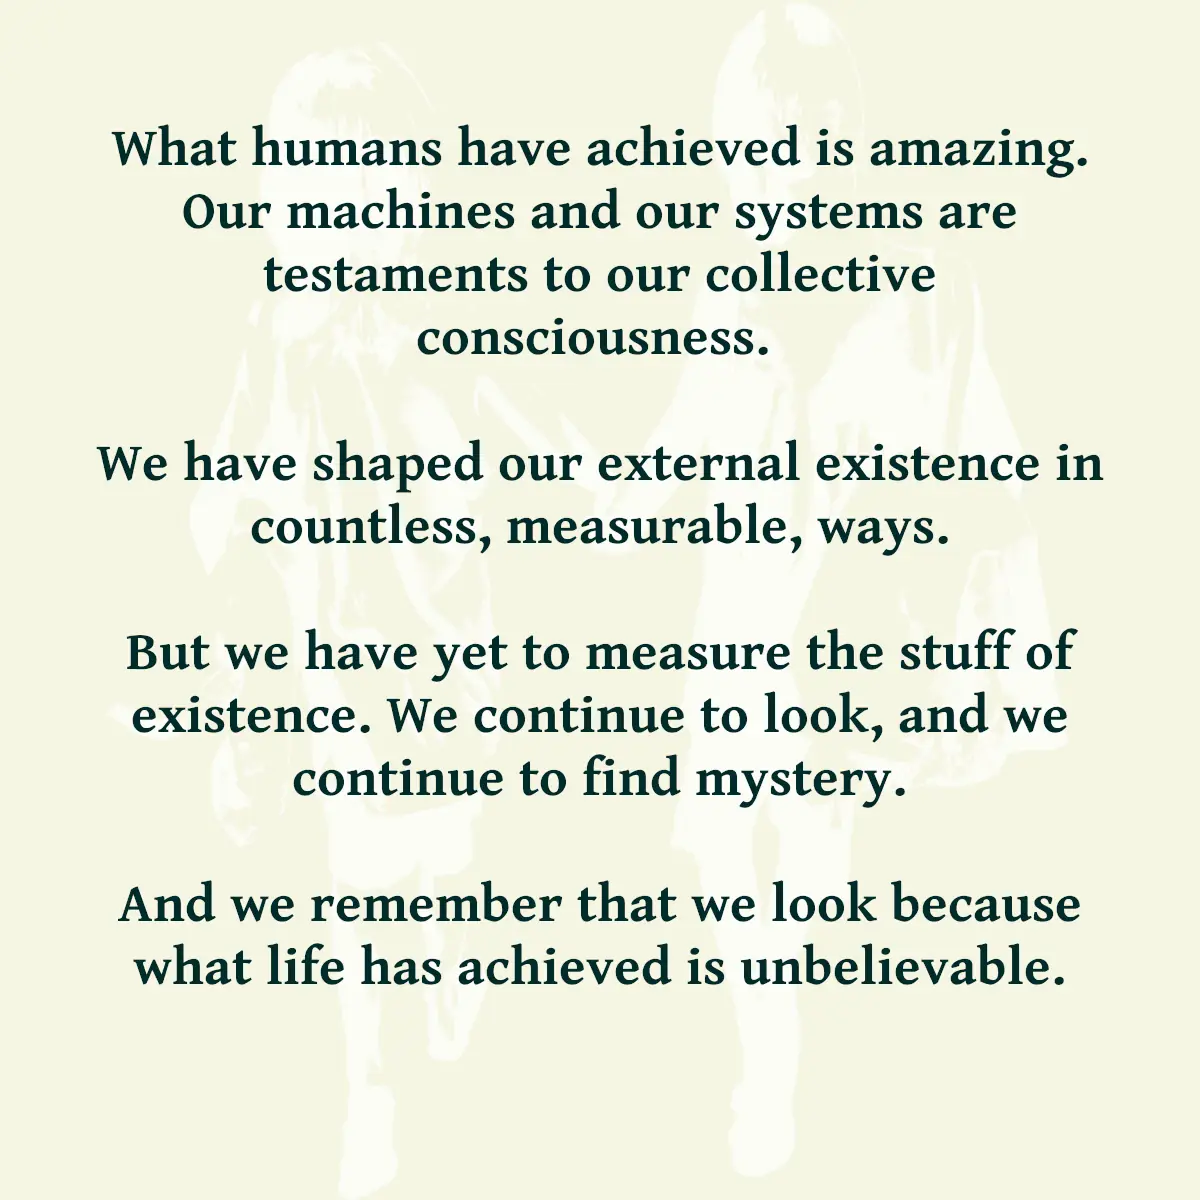 What humans have achieved is amazing. Our machines and our systems are testaments to our collective consciousness. We have shaped our external existence in countless, measurable, ways. But we have yet to measure the stuff of existence. We continue to look, and we continue to find mystery. And we remember that we look because what life has achieved is unbelievable.